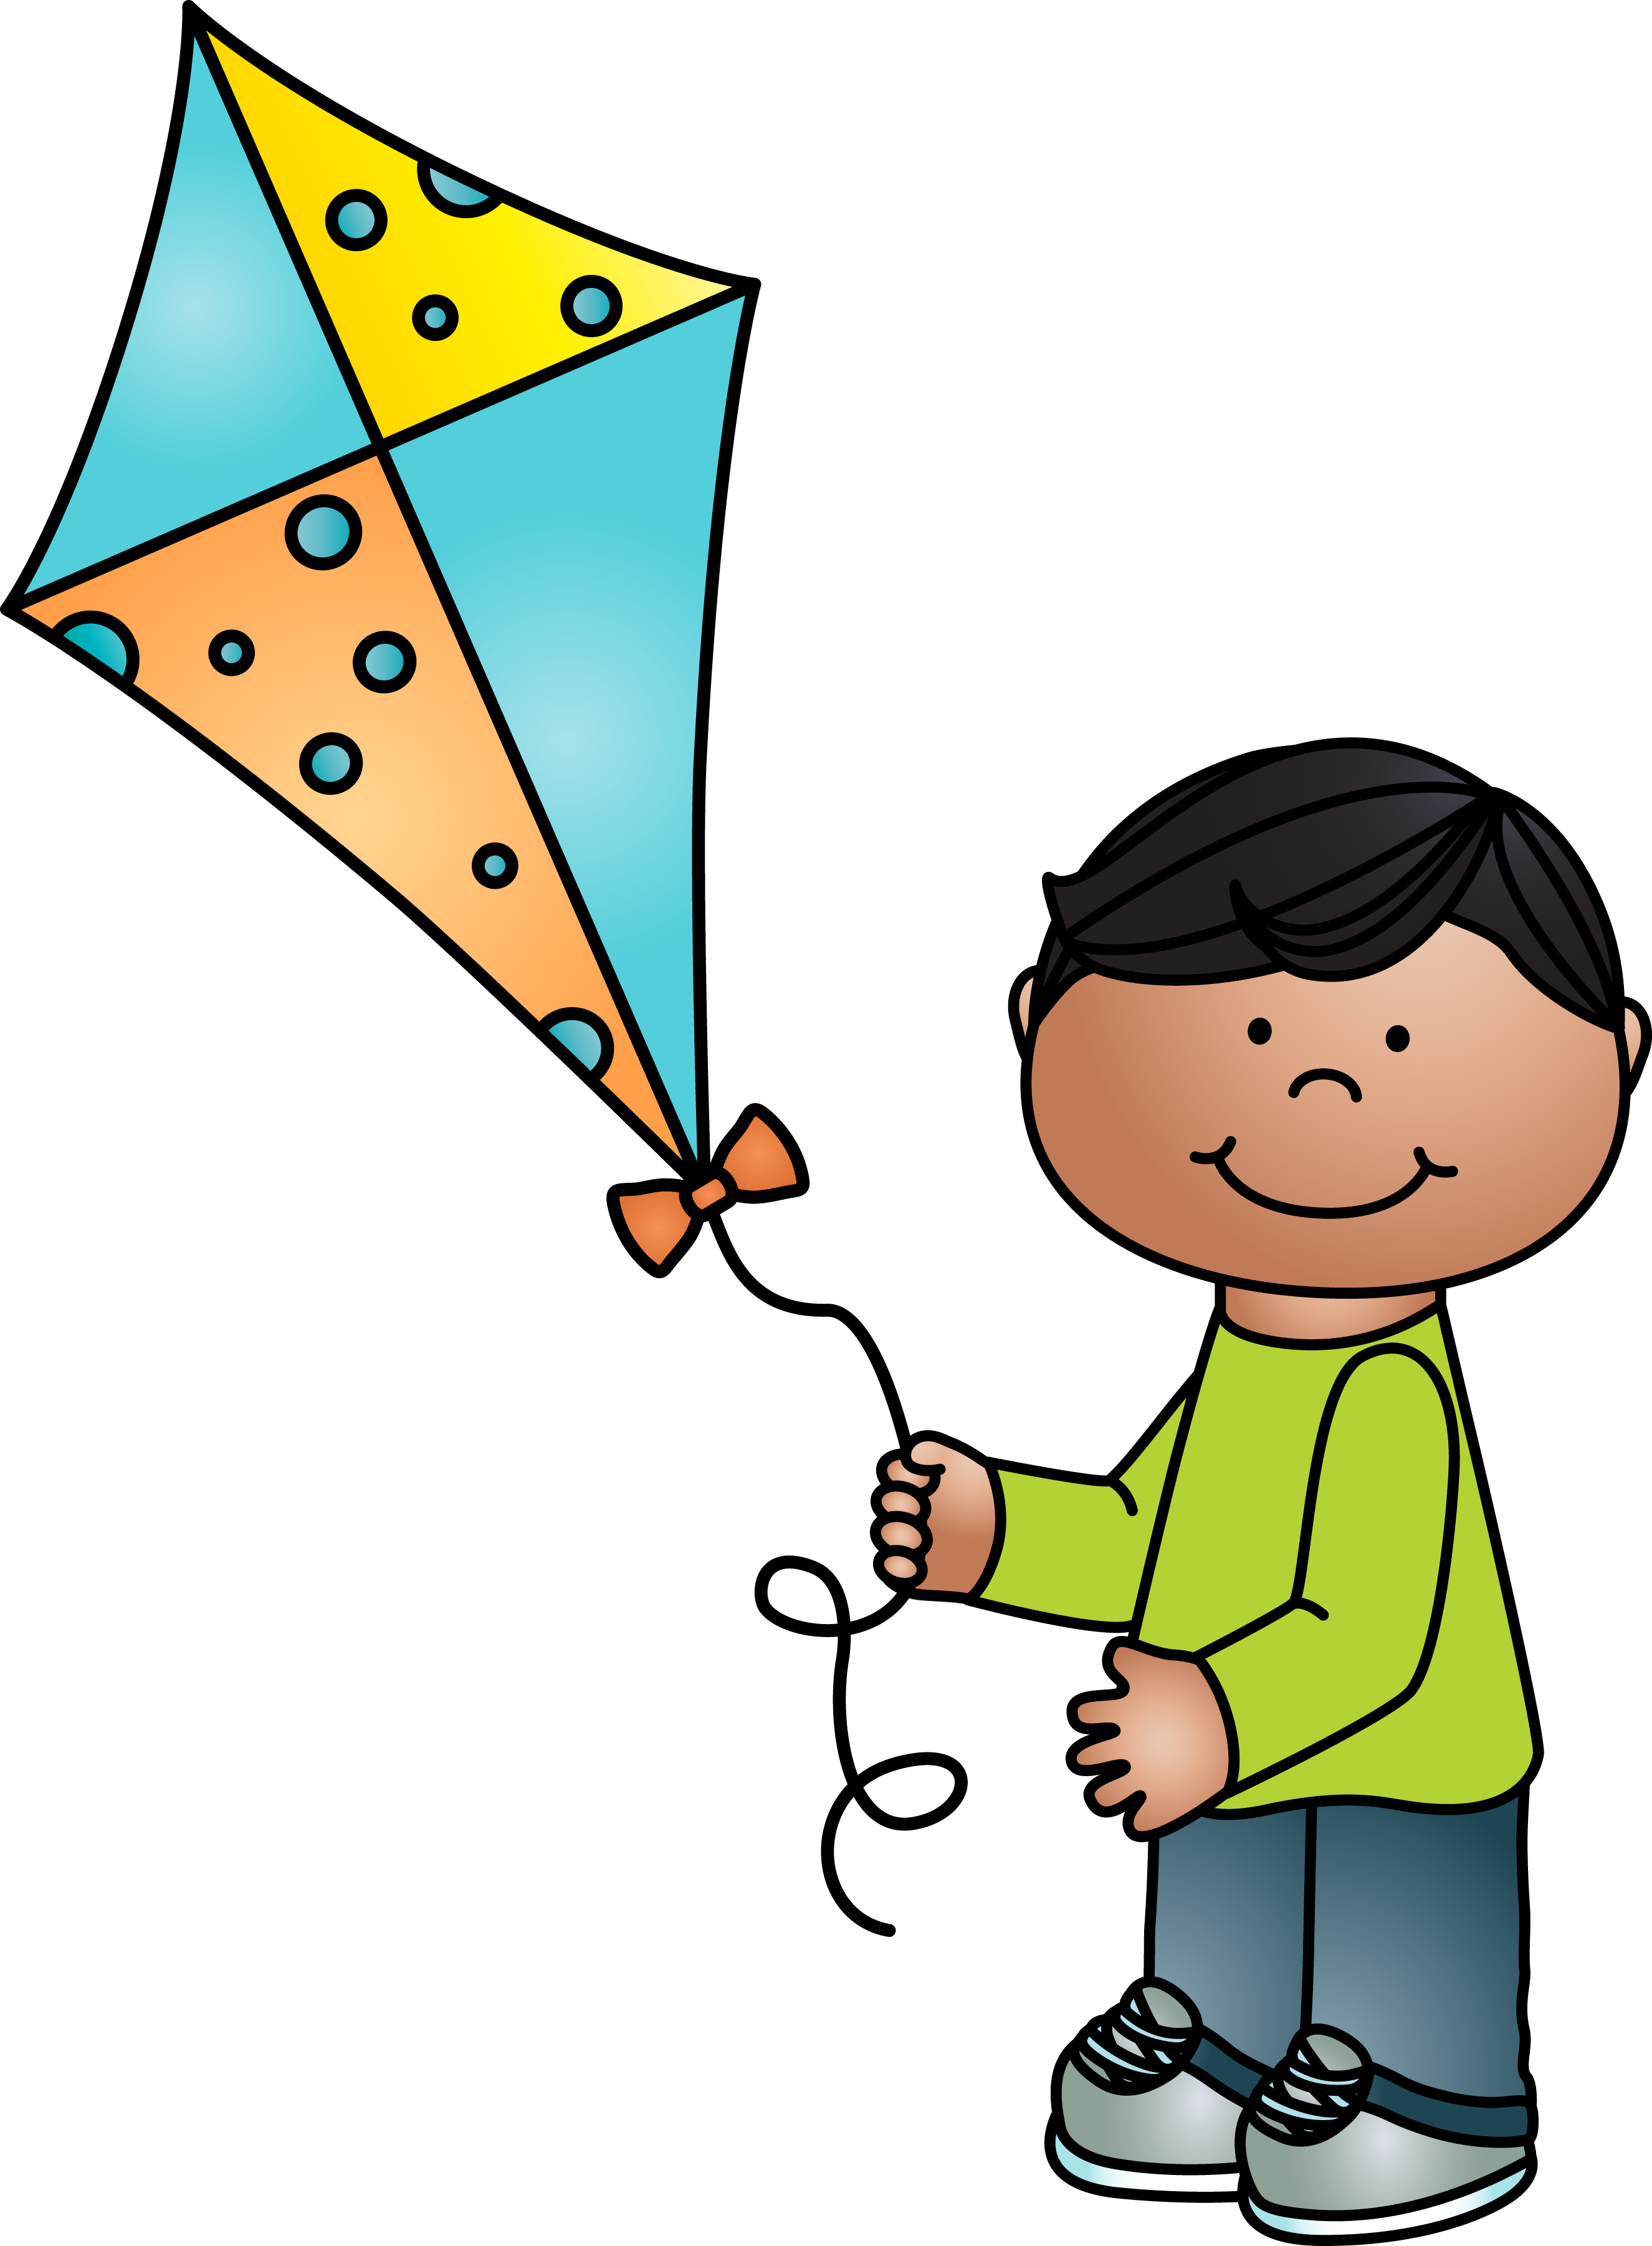 boy-flying-kite_WhimsyClips.png